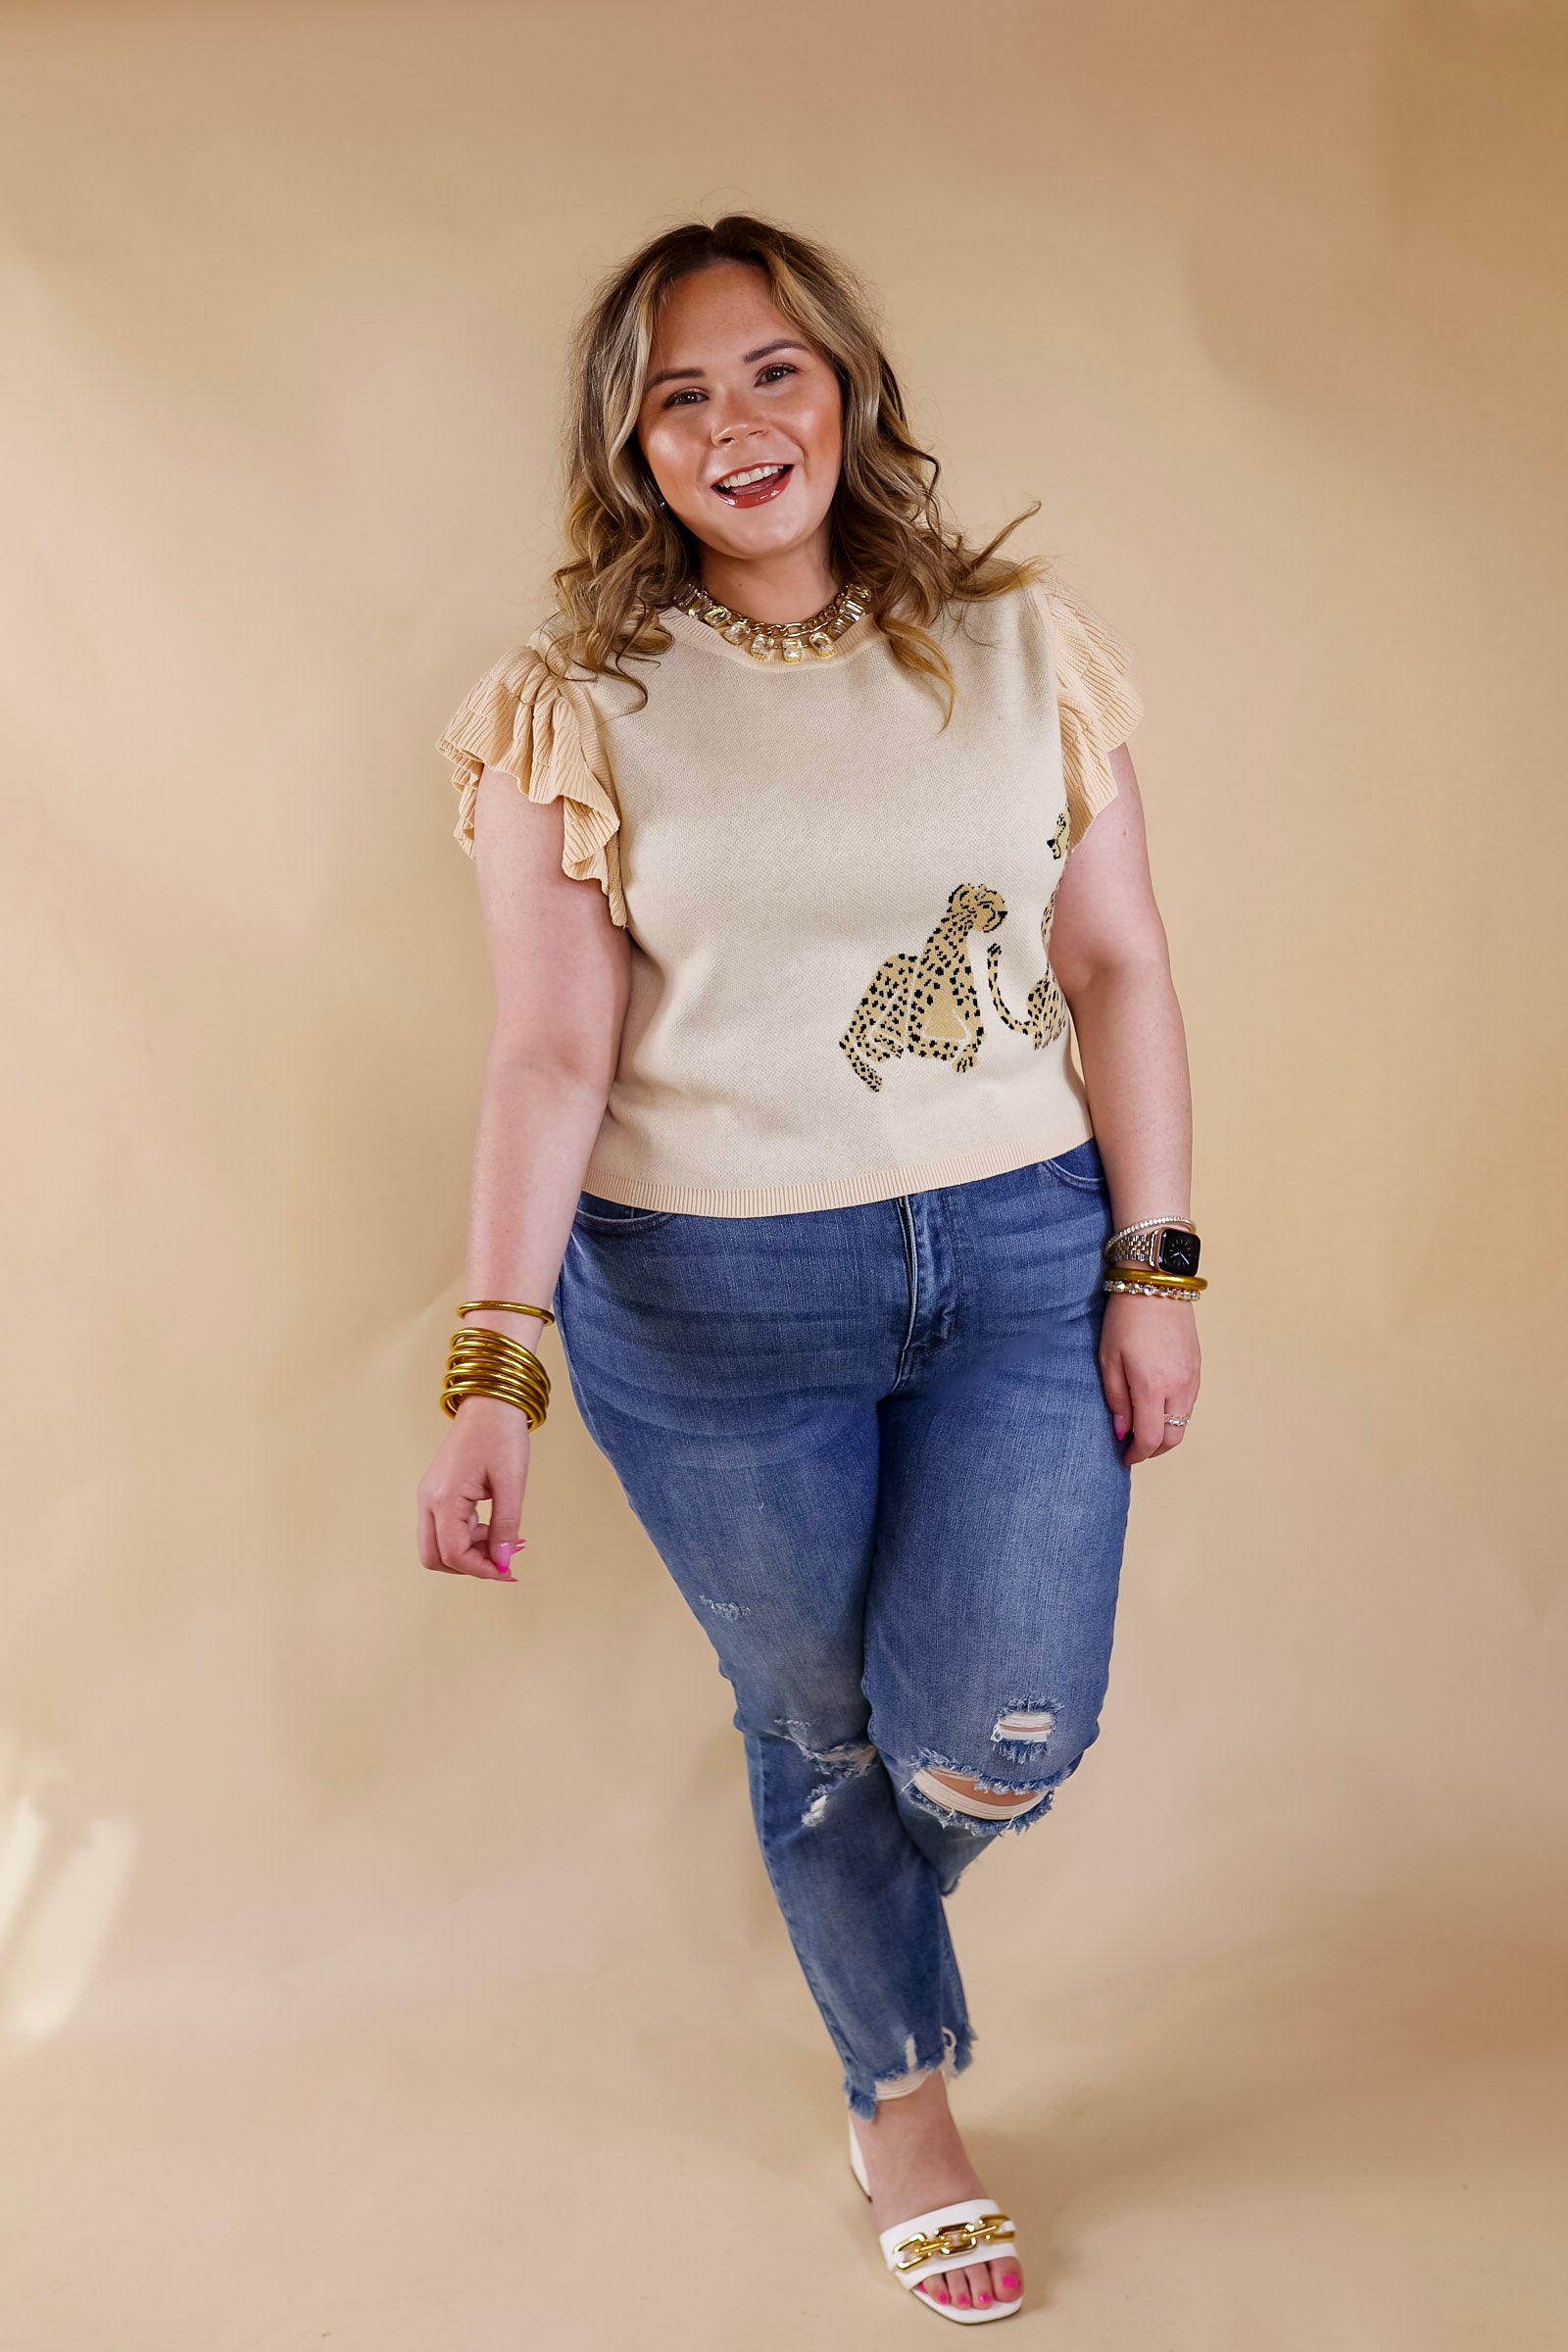 Talk This Way Cheetah Print Sweater with Ruffle Cap Sleeves in Beige - Giddy Up Glamour Boutique